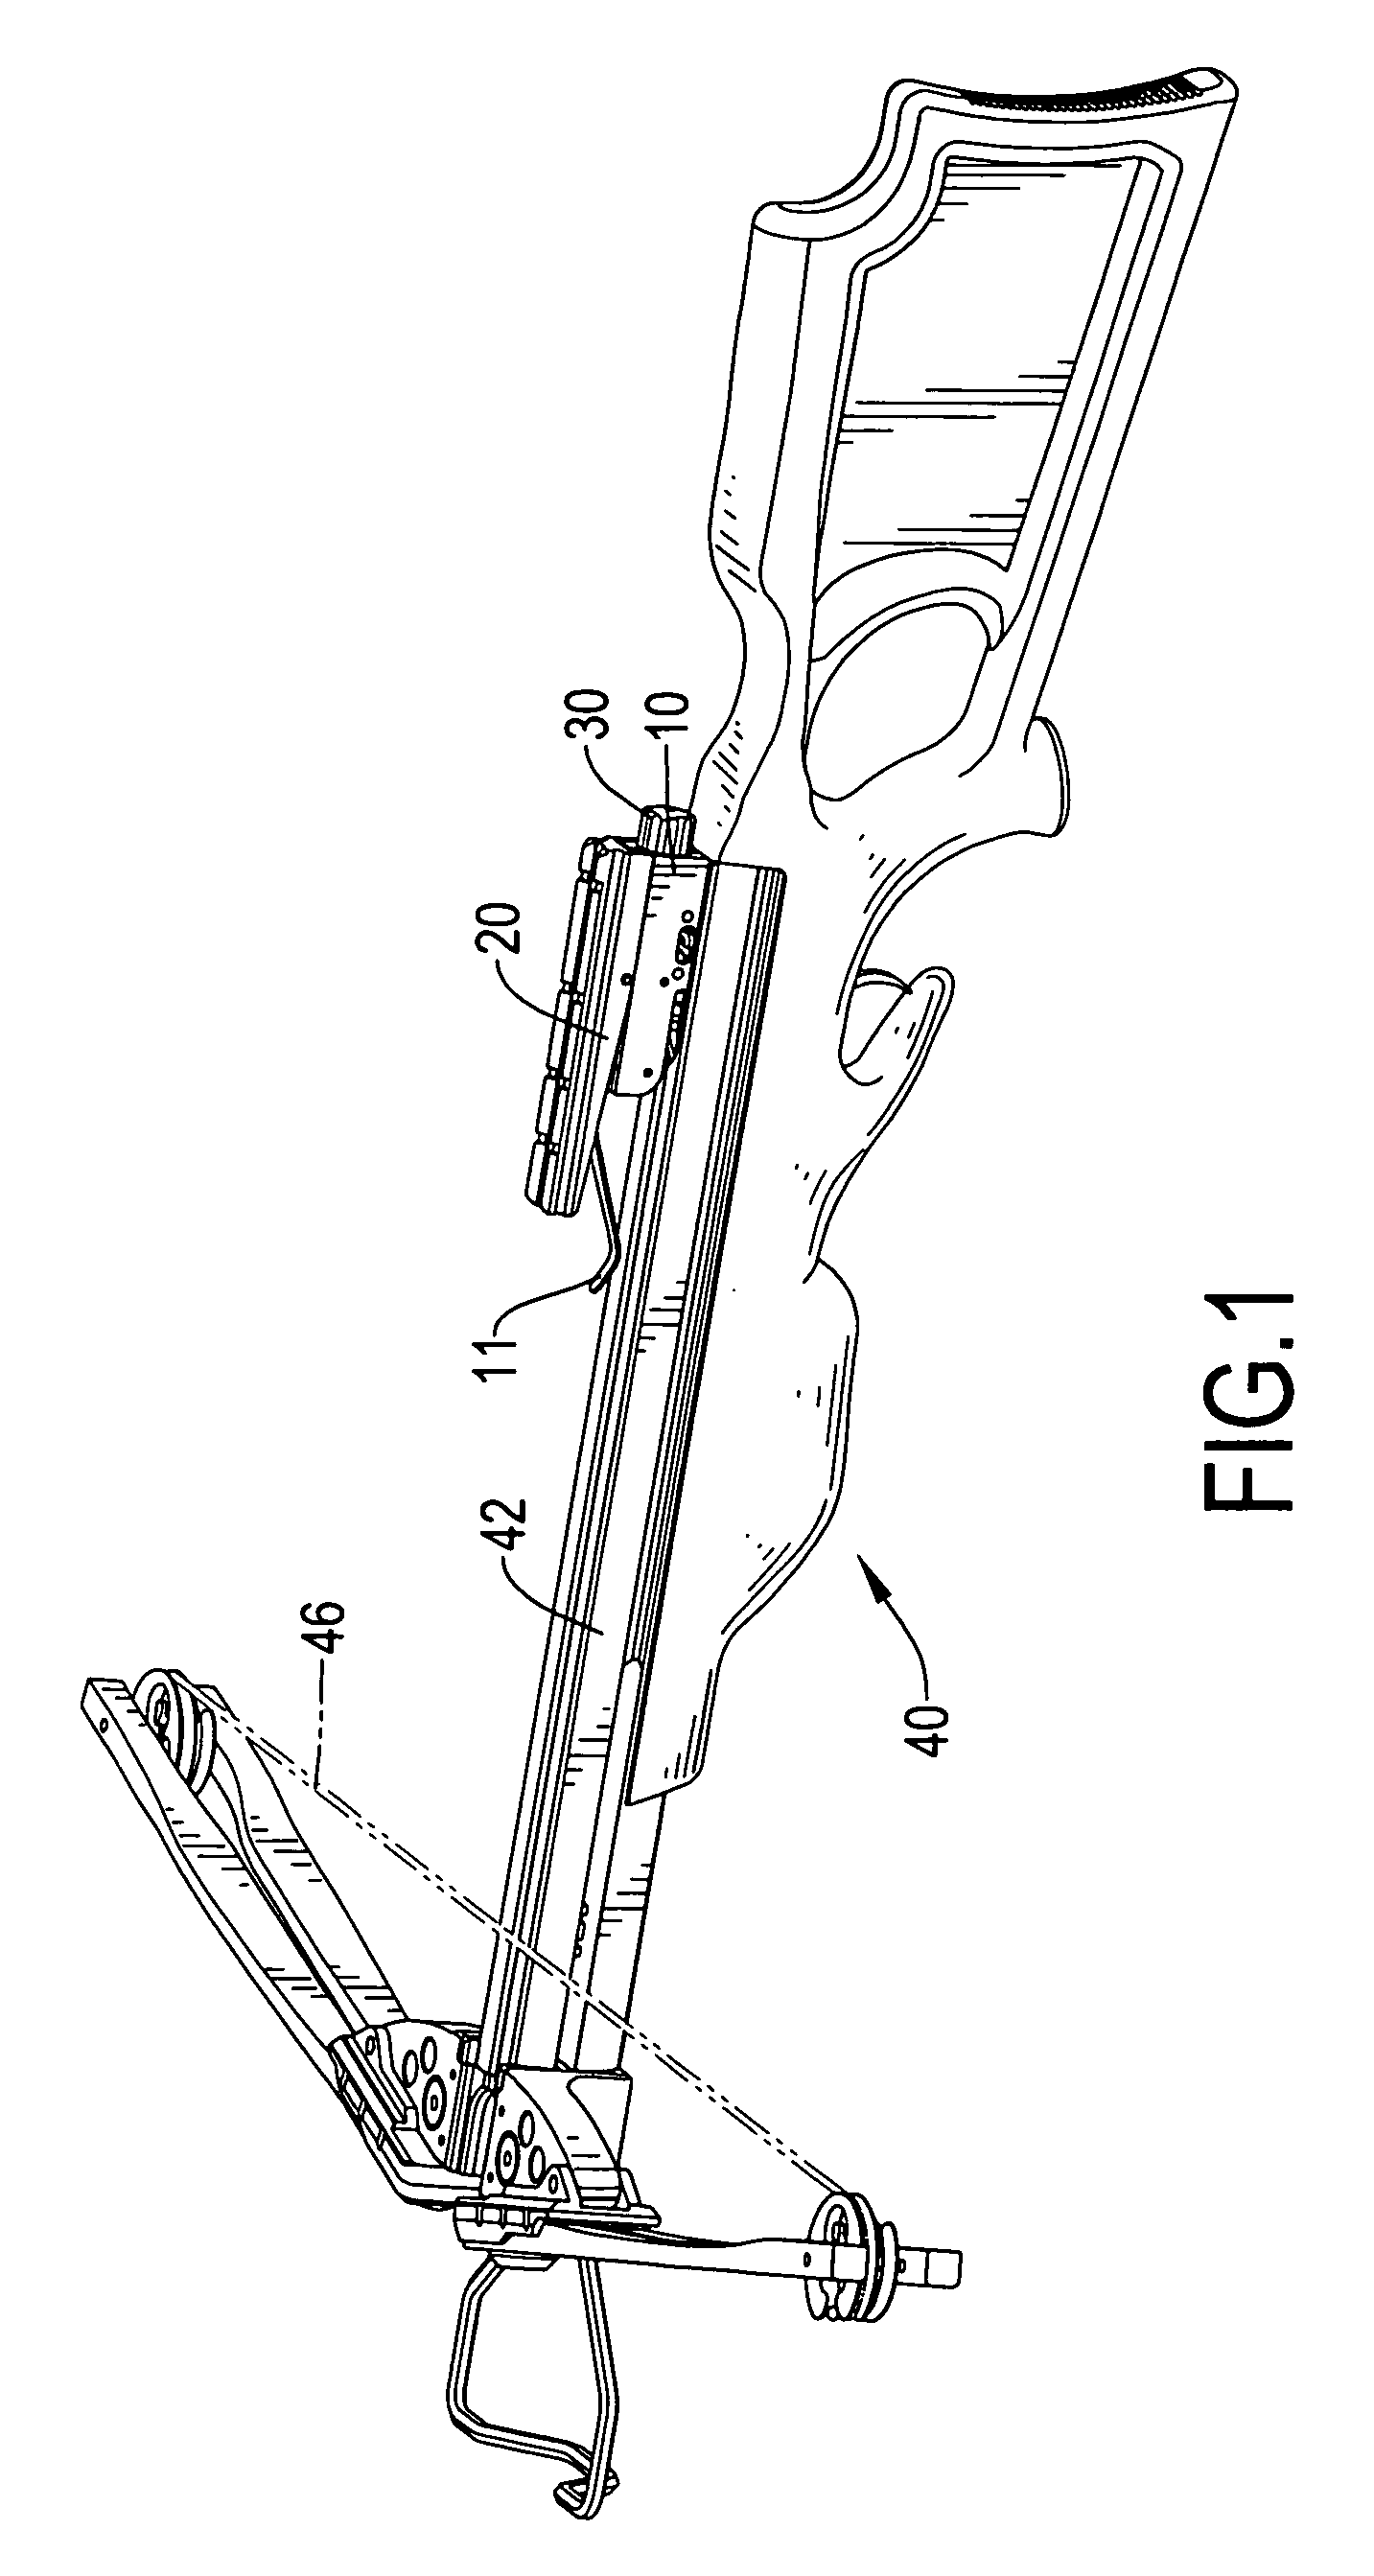 Trigger assembly with a safety device for a crossbow